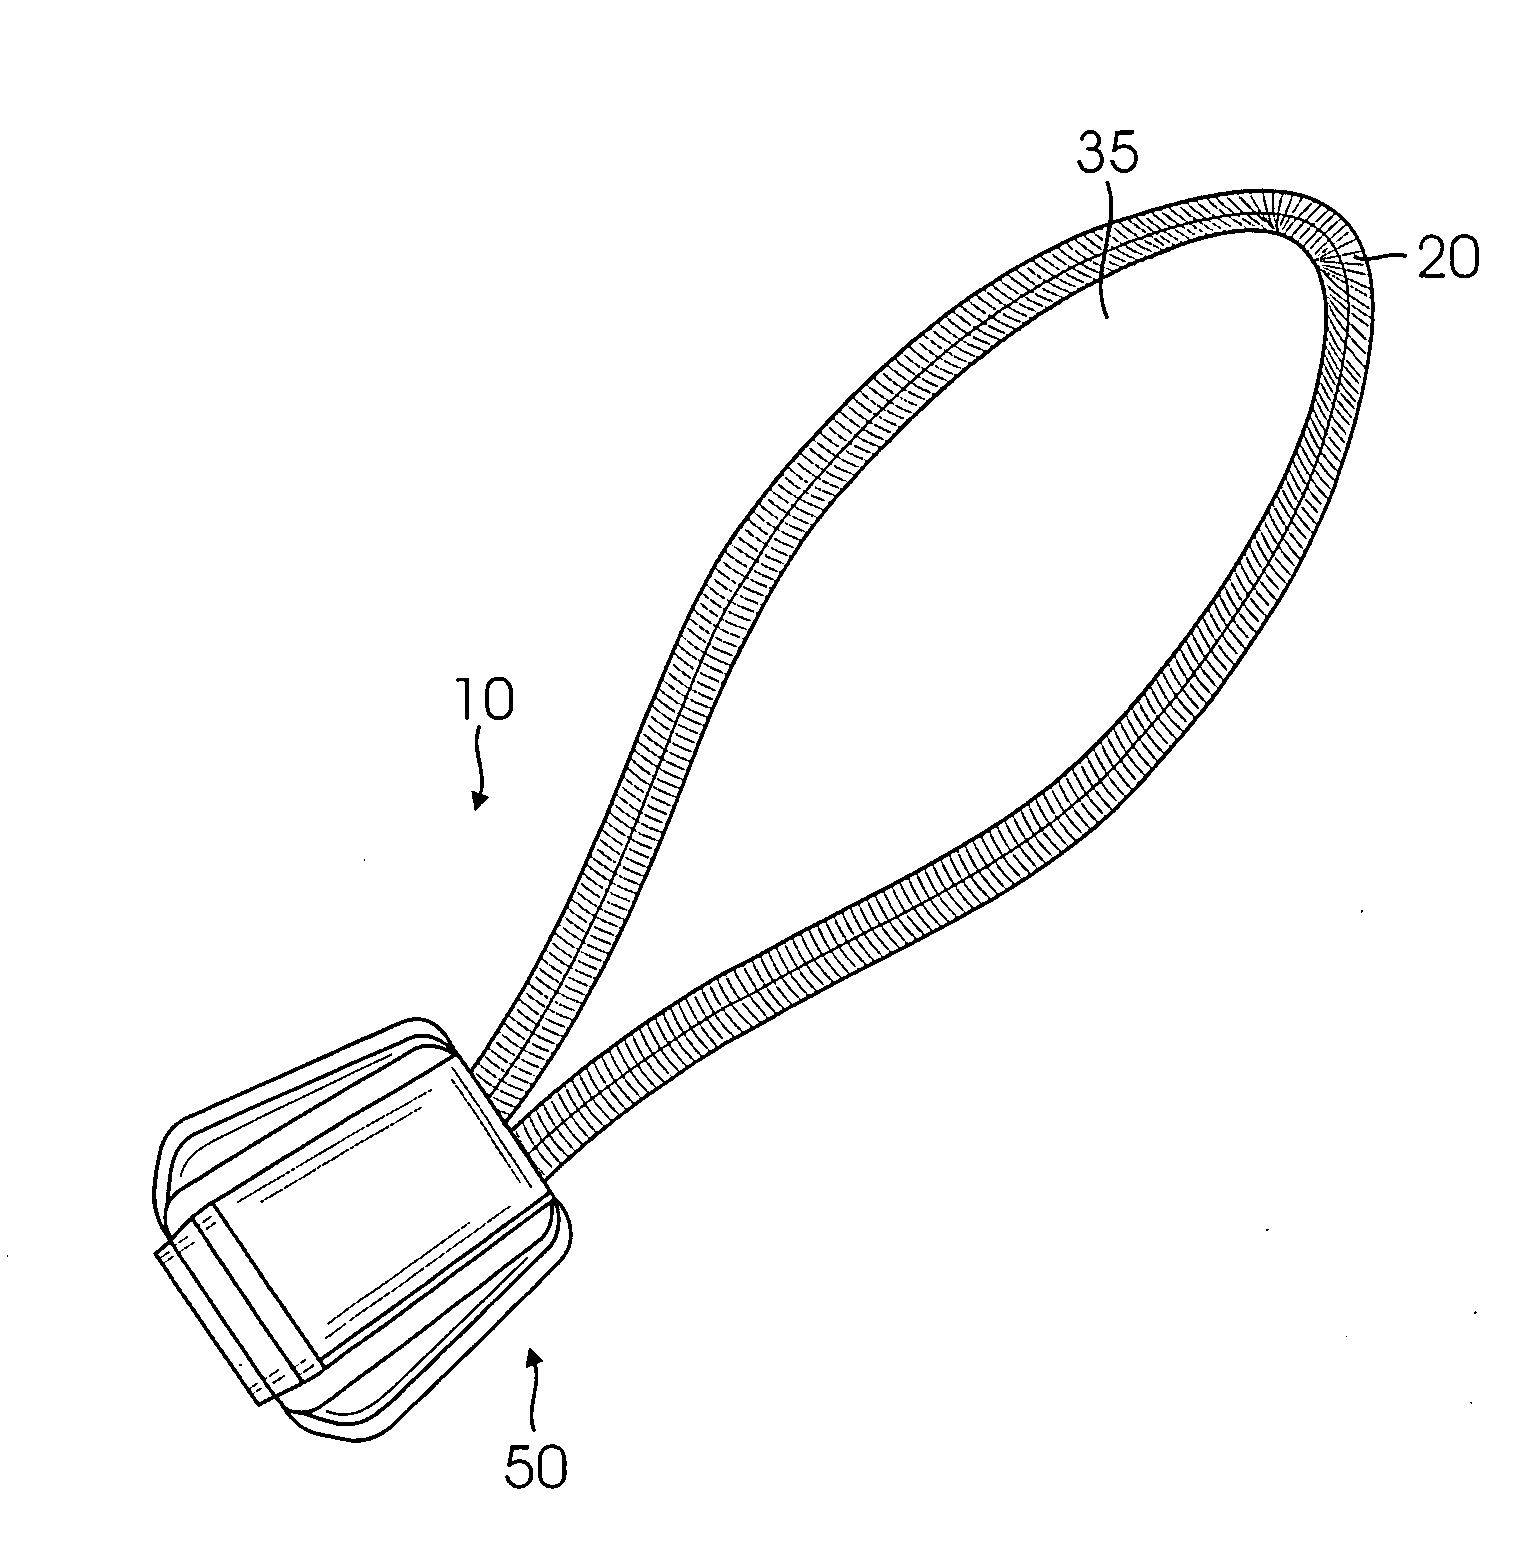 Apparatus to retain a coil wire from a microphone to prevent the microphone from falling away from a person